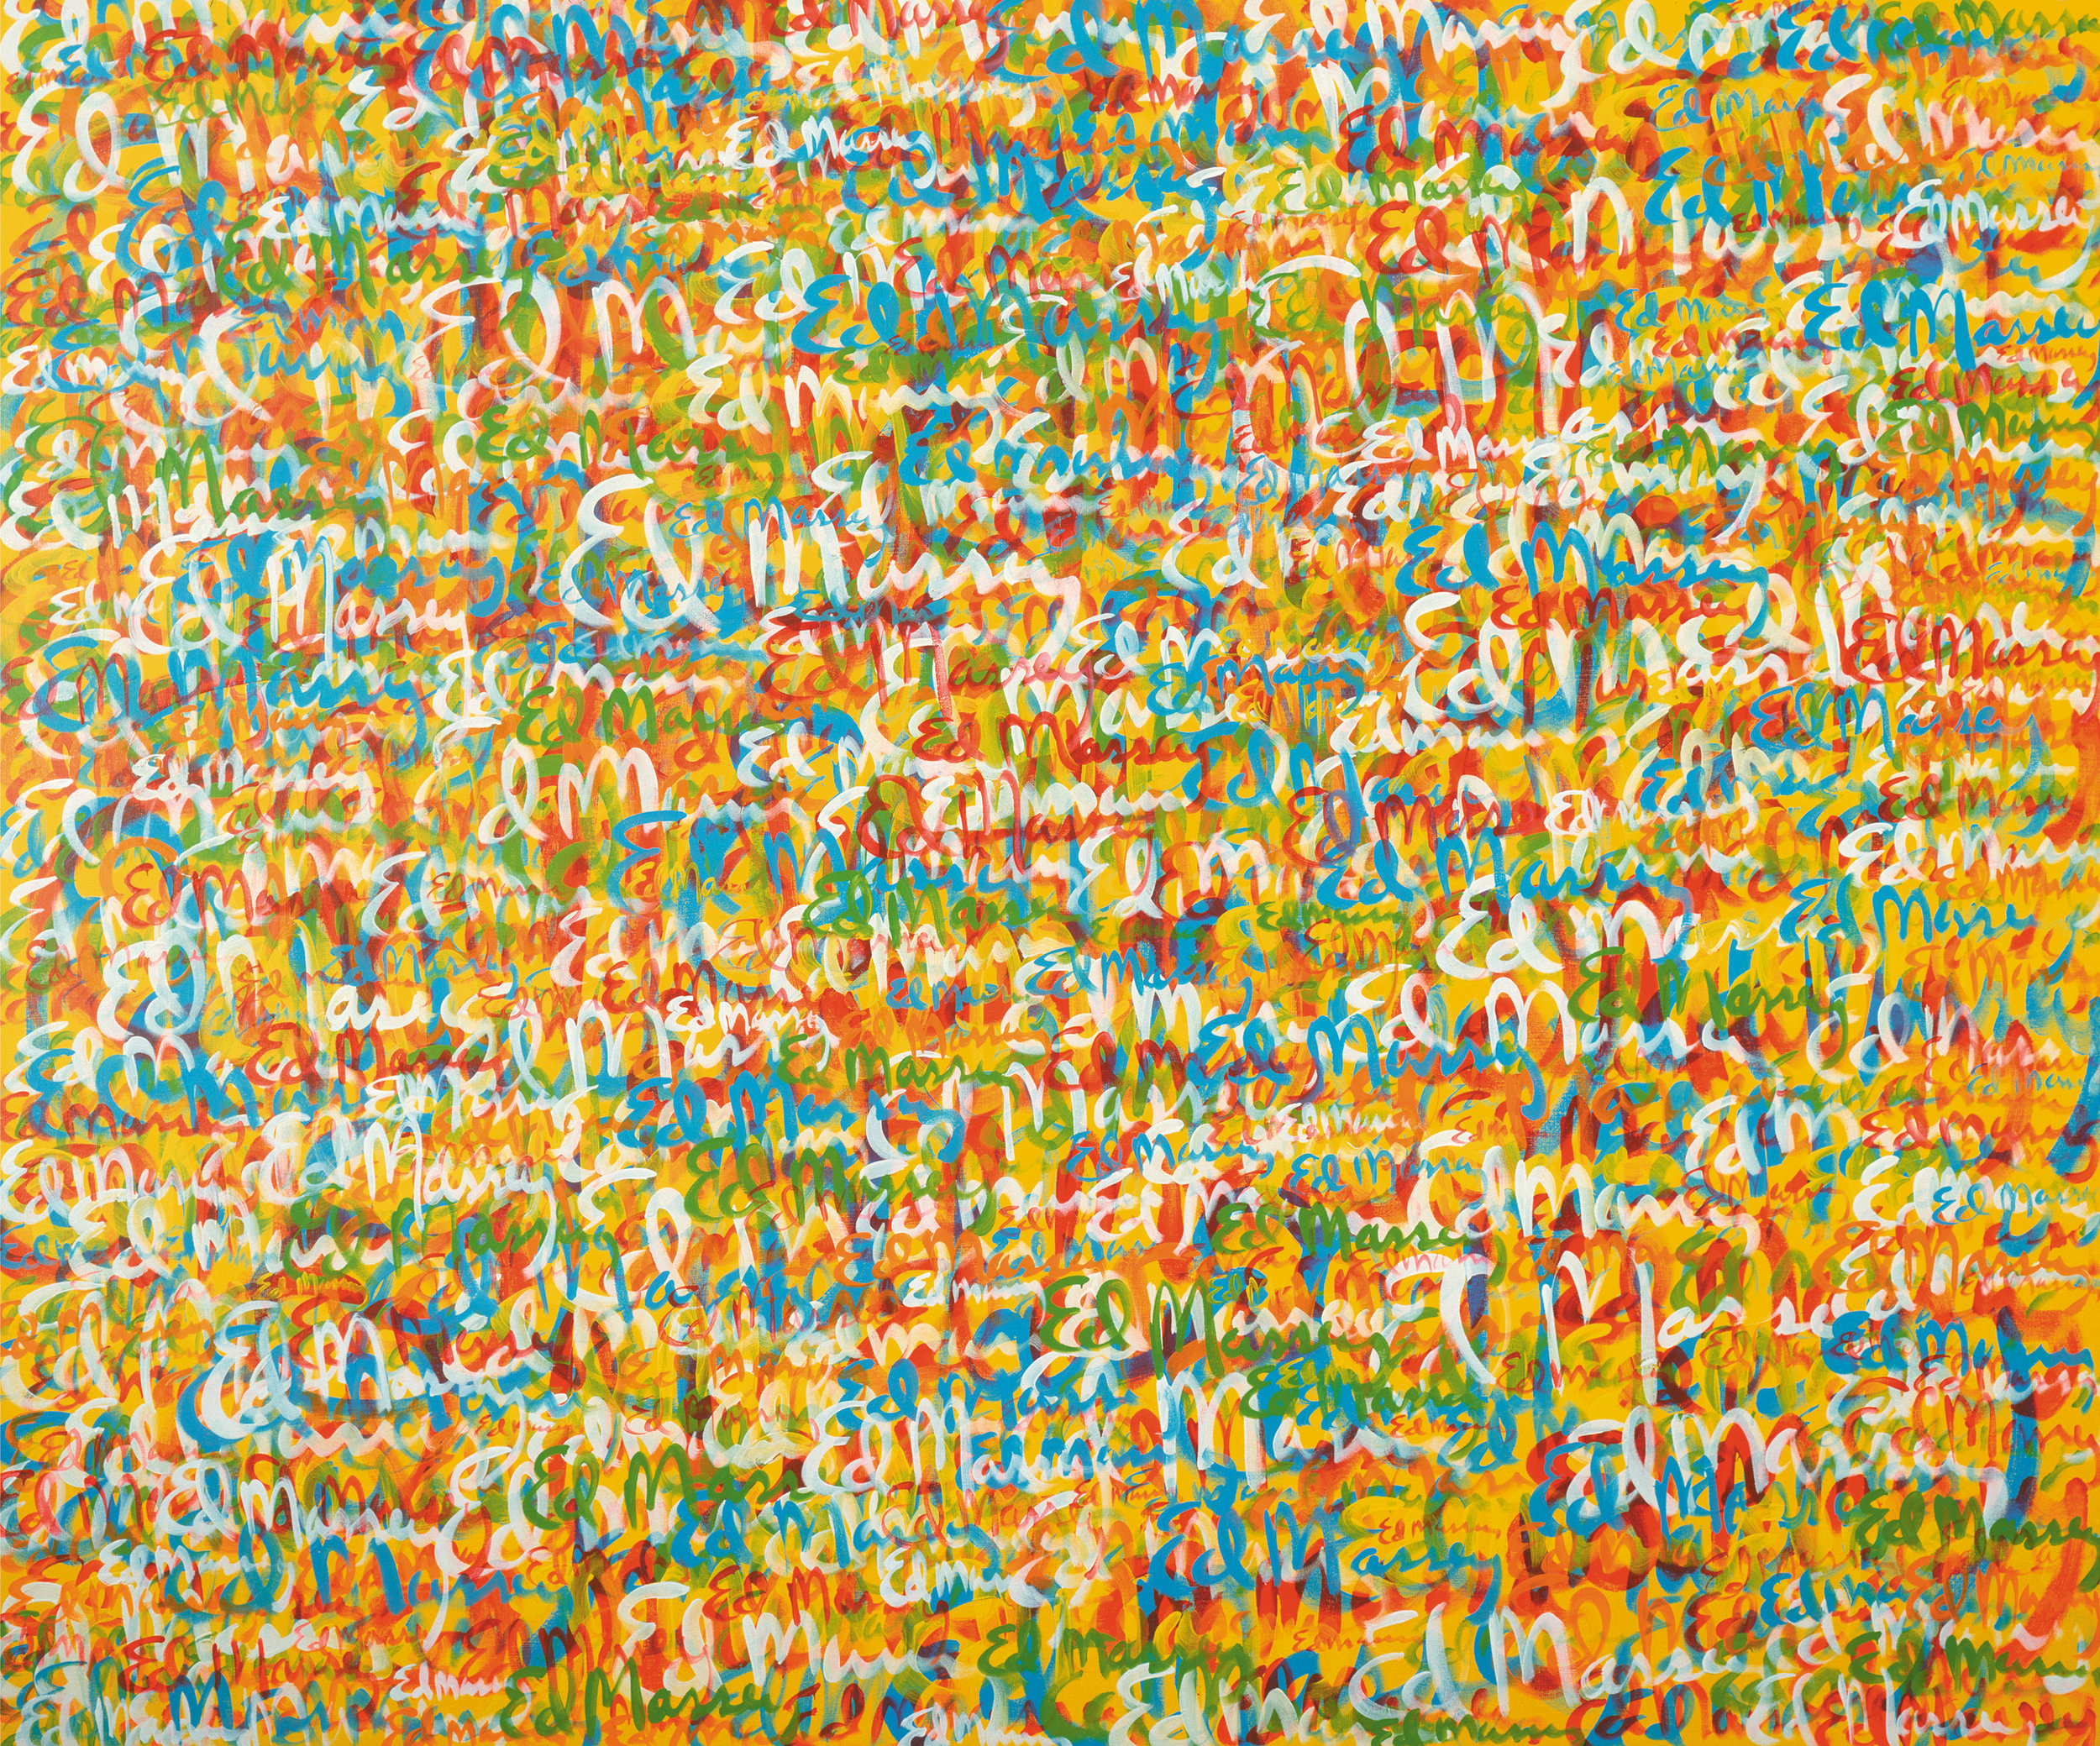 Signature Painting Colorfield, 2001